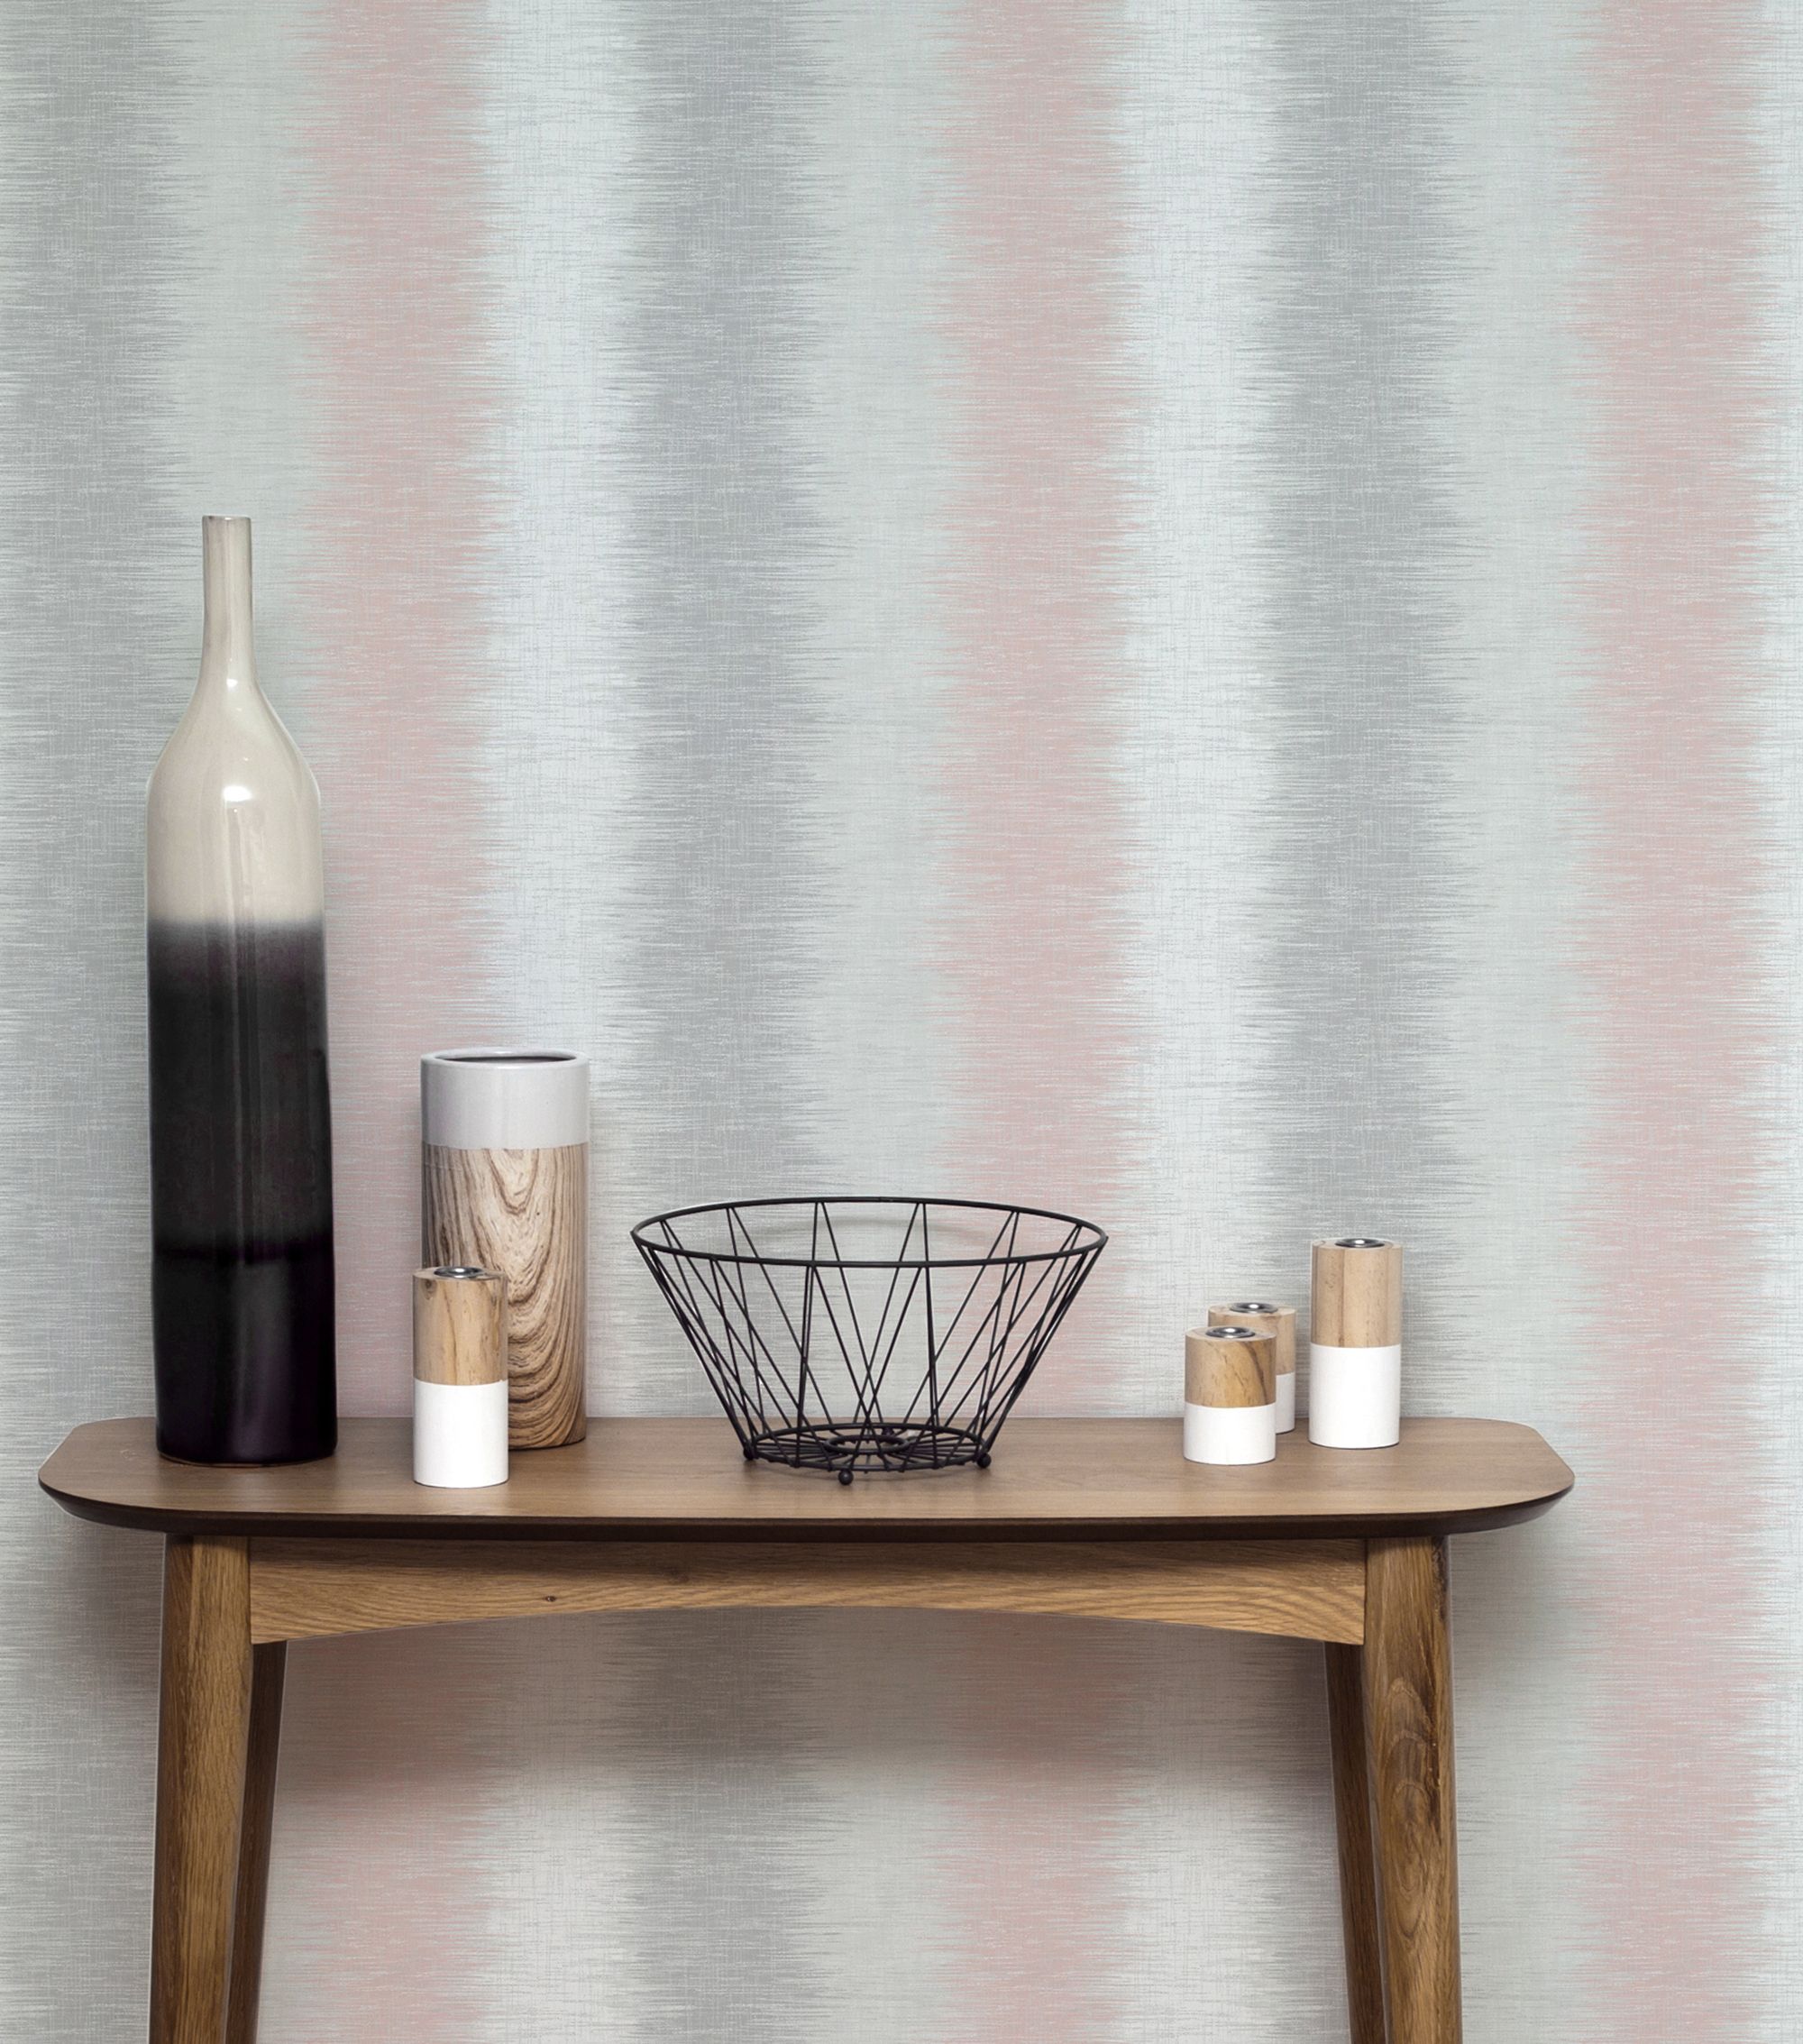 Fine Décor Aukland Grey & pink Striped Smooth Wallpaper Sample